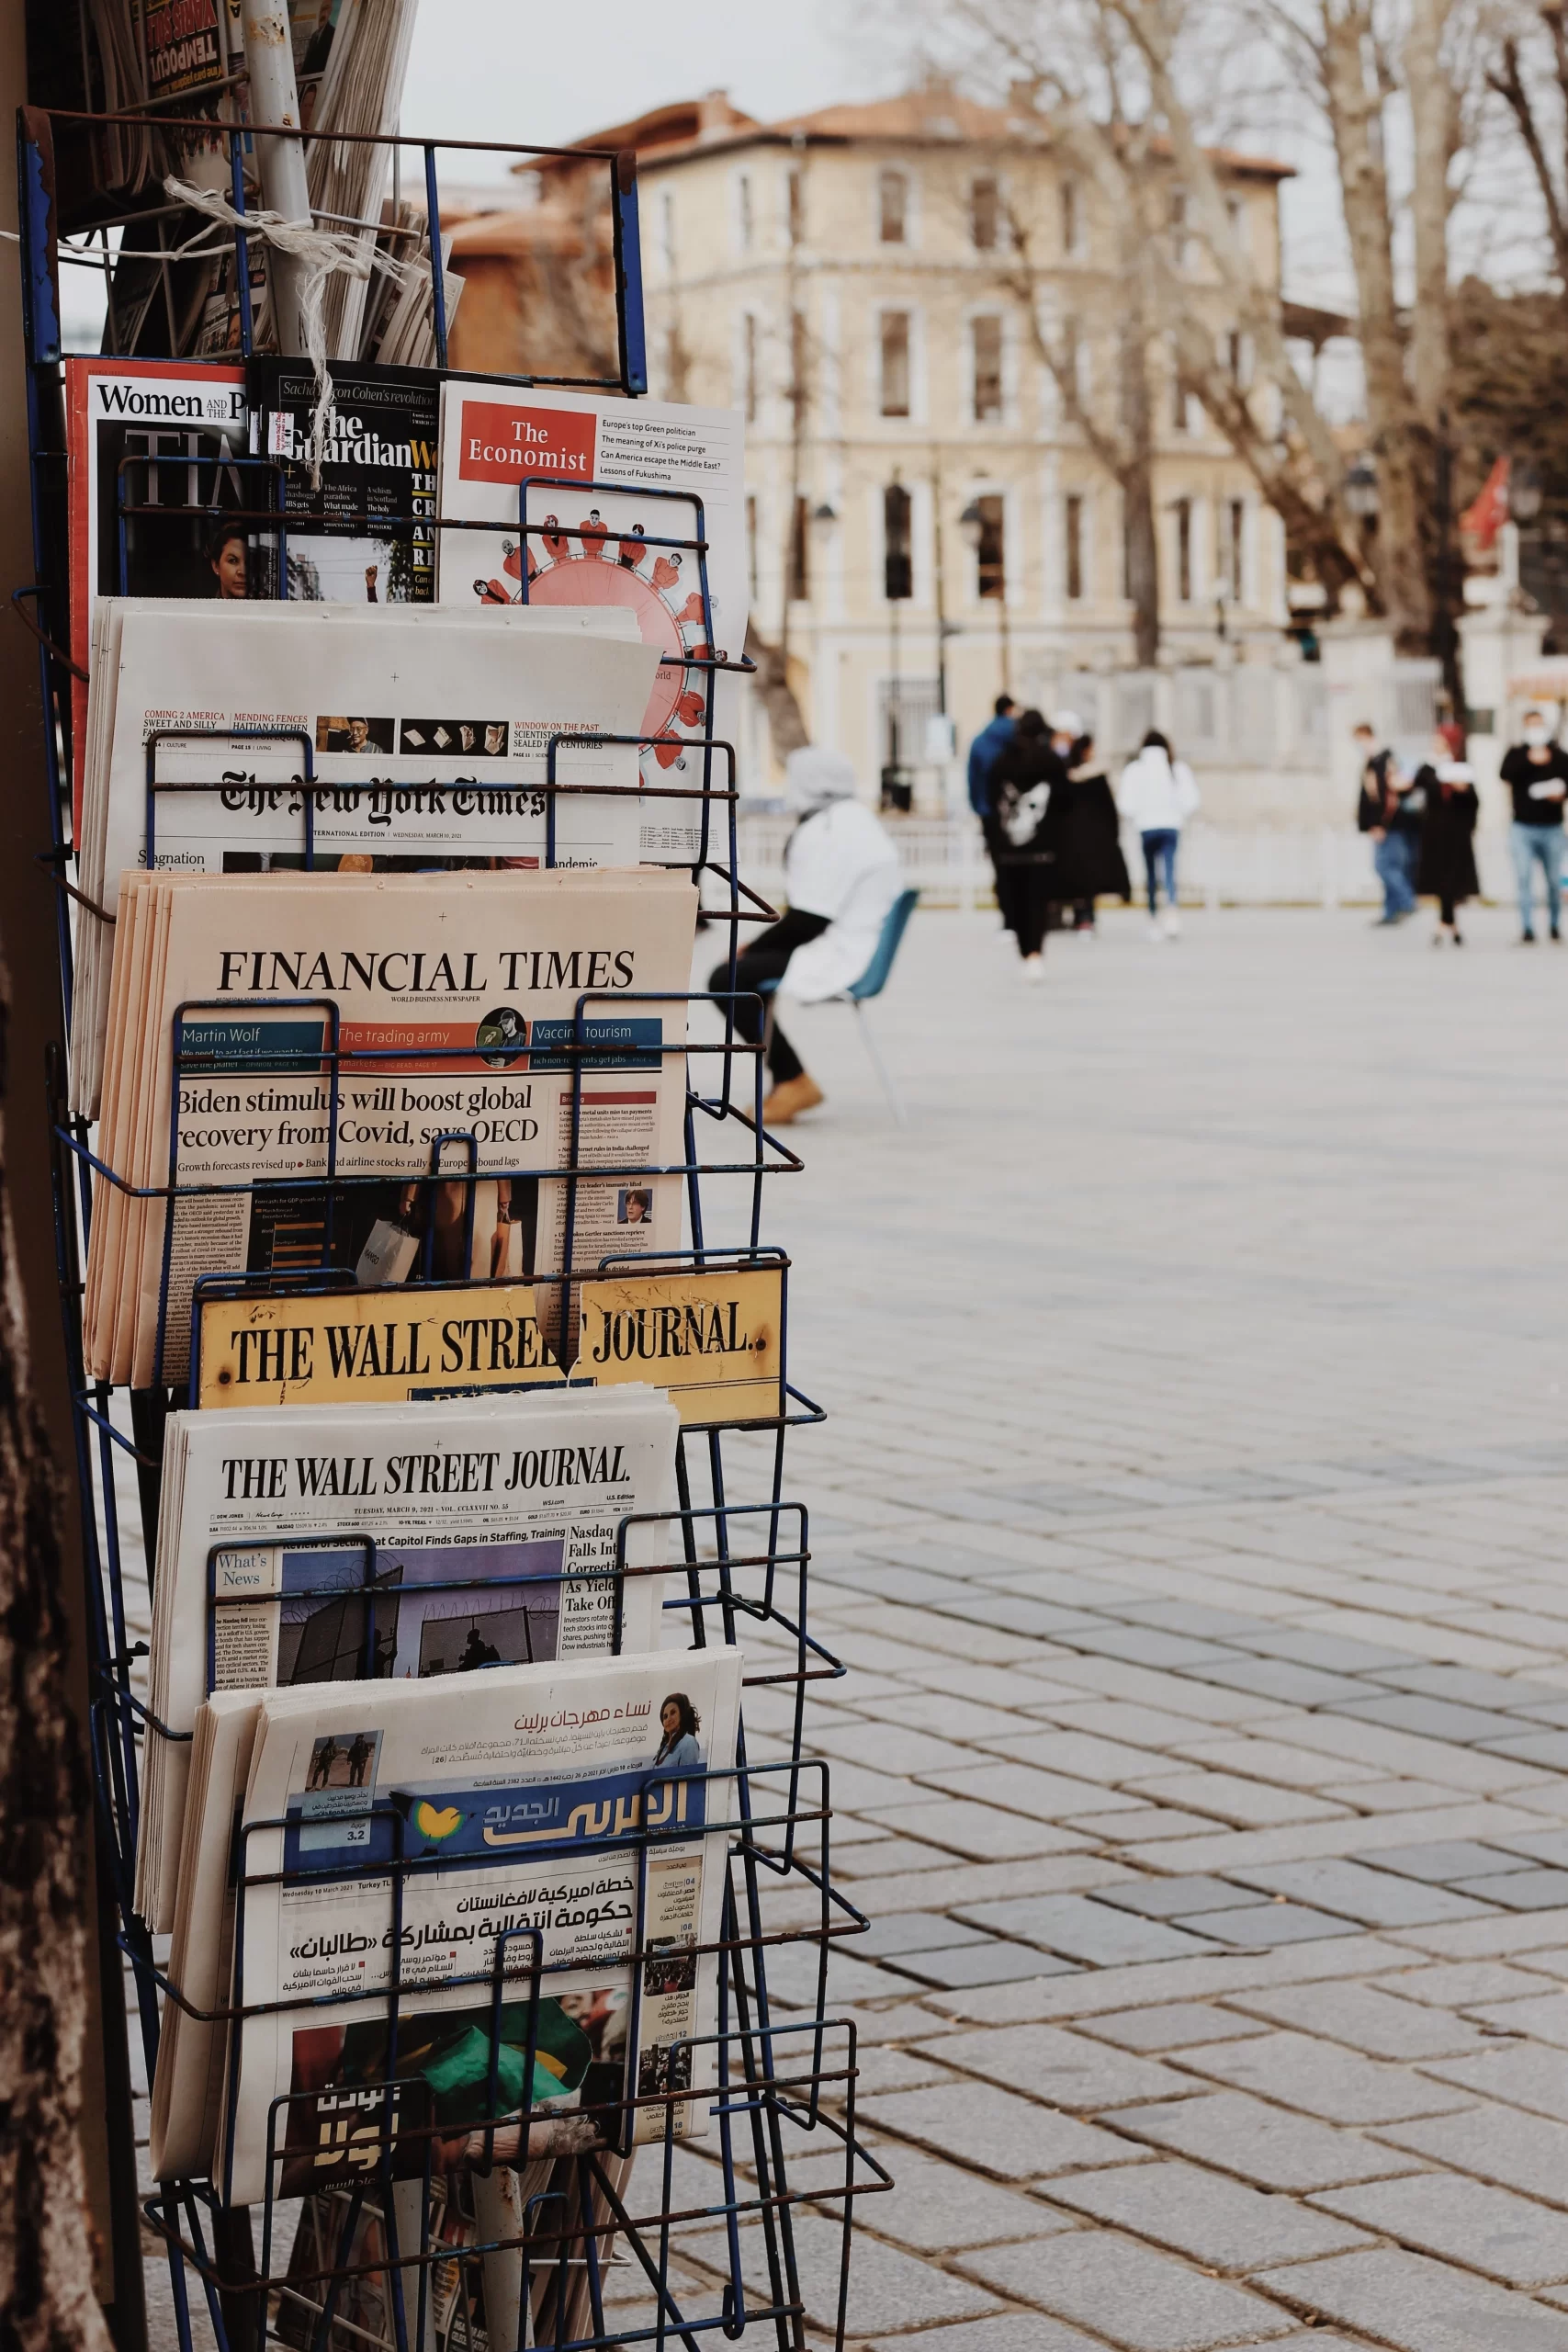 Newspapers in news rack on display.</p>
<p>Published on March 10, 2021<br />
Canon, EOS 700D<br />
Free to use under the Unsplash License